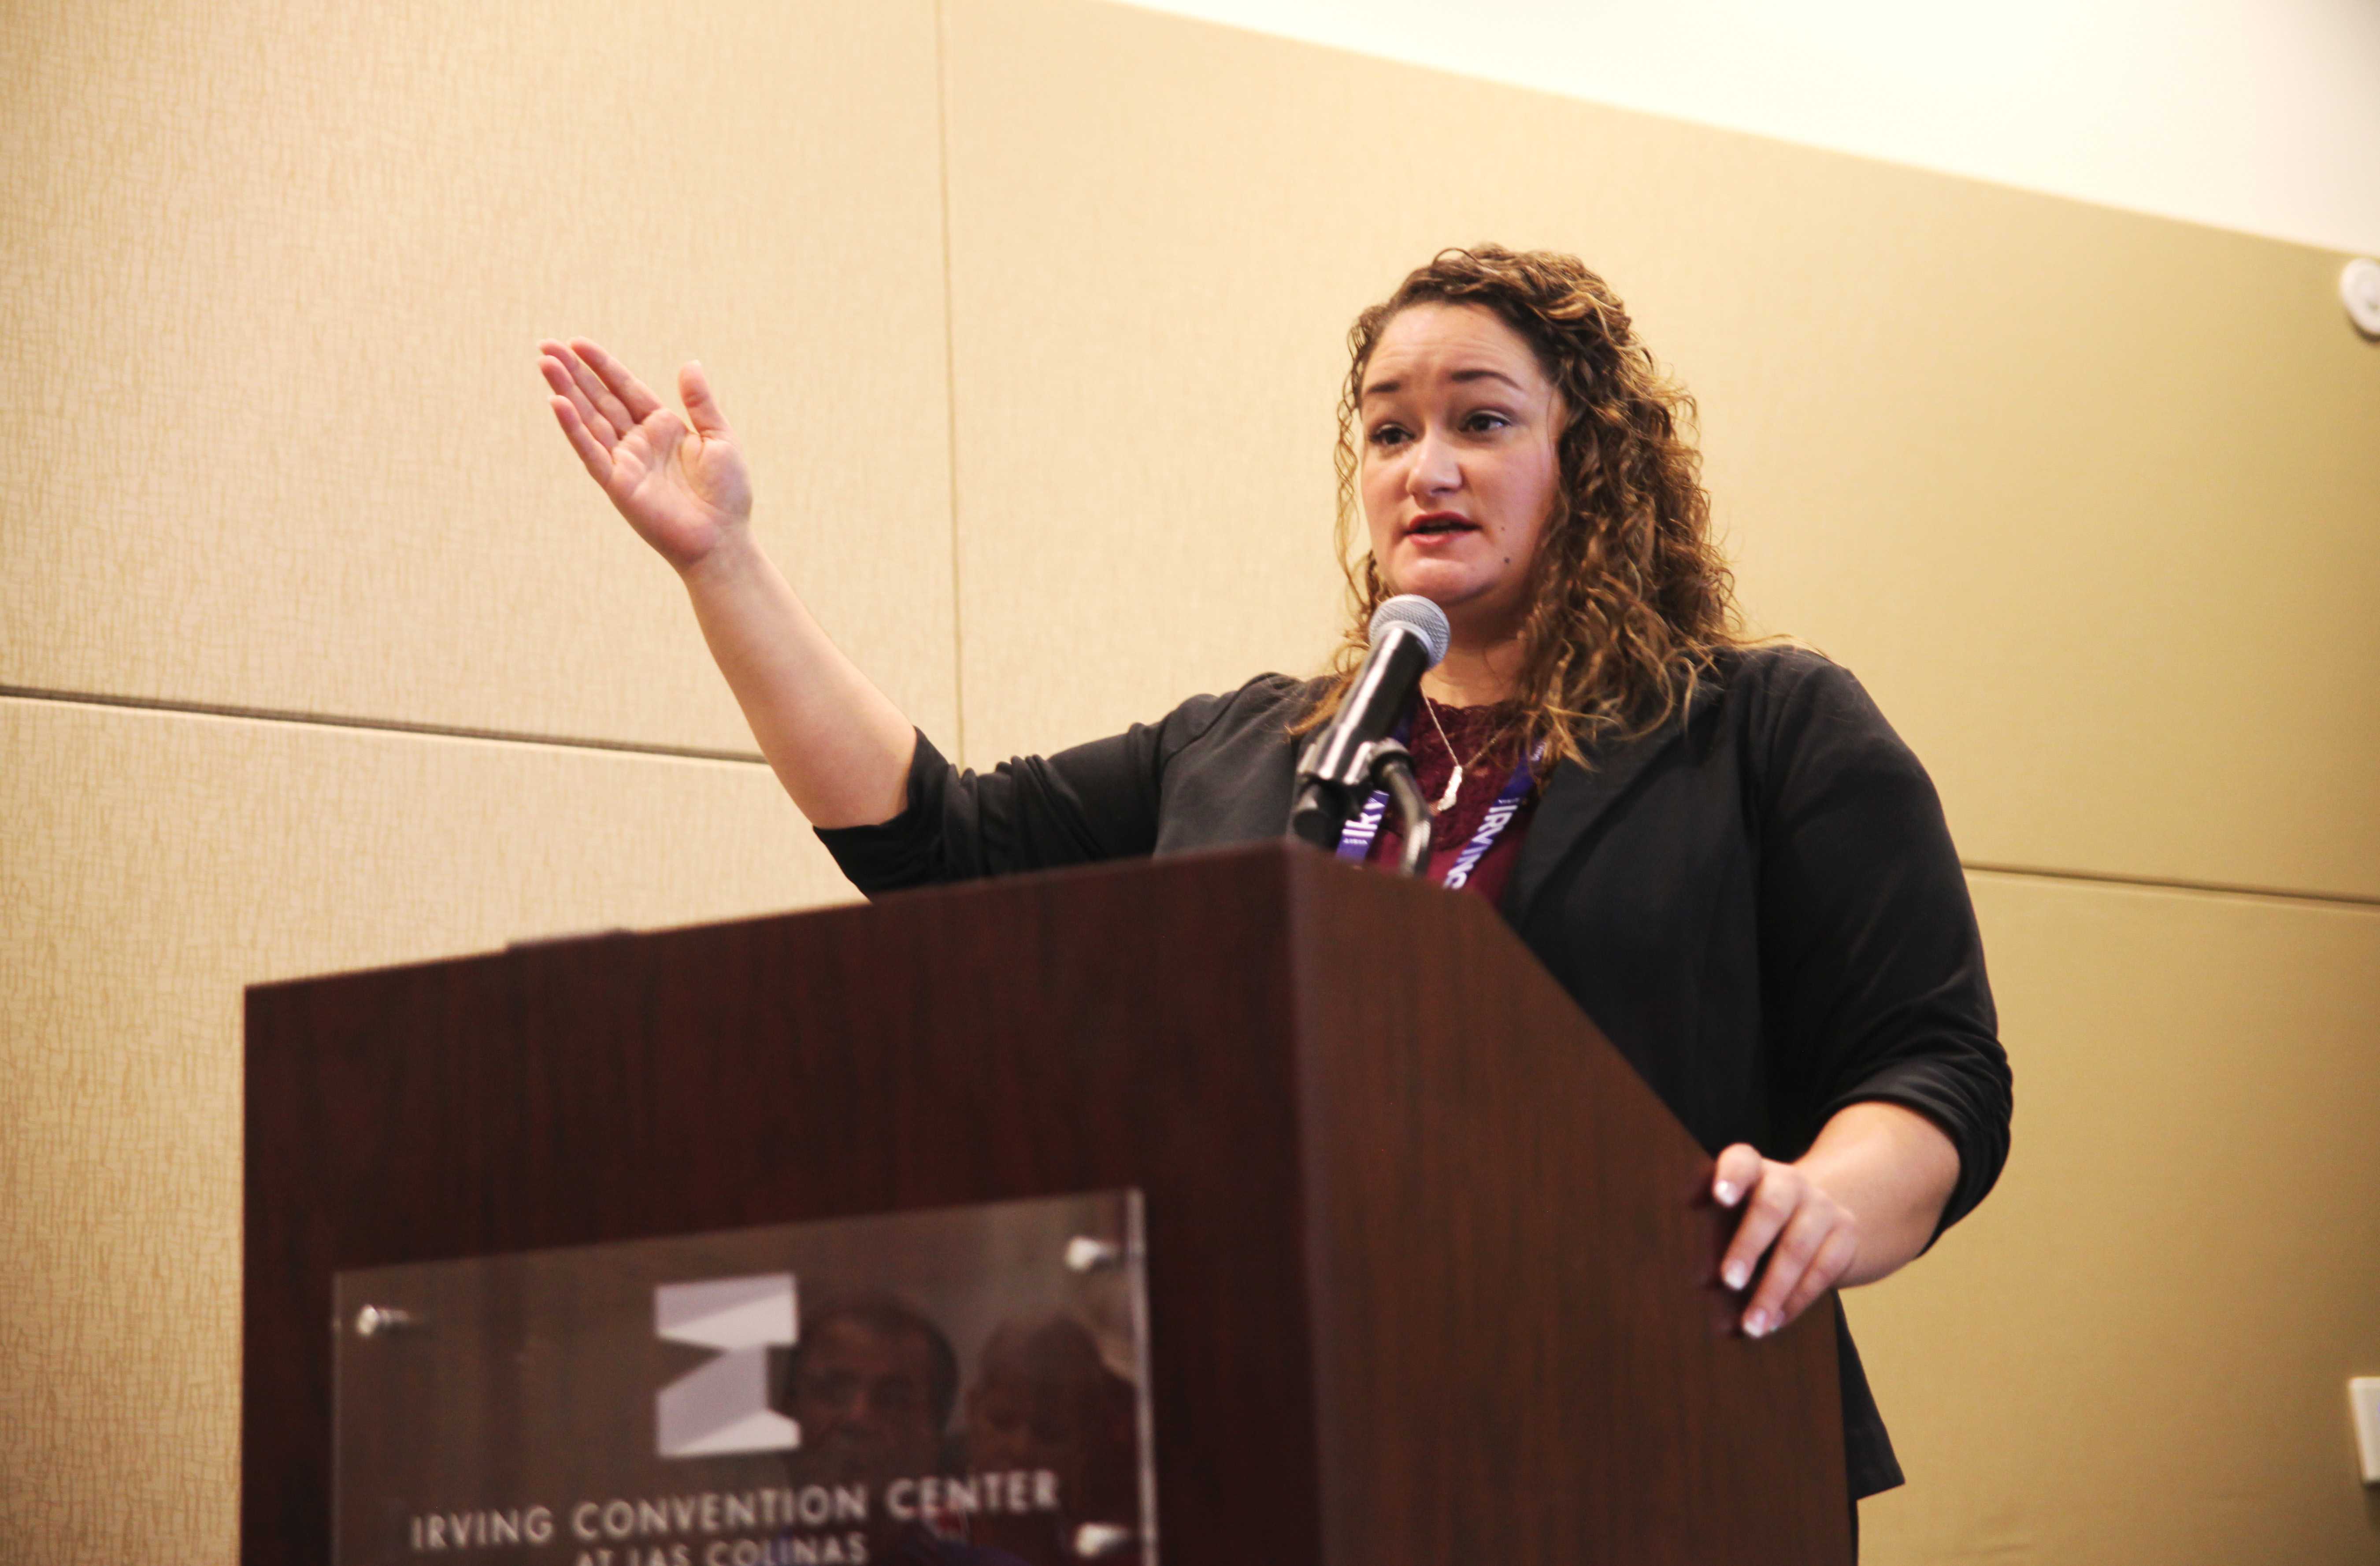 Photo by Dr. Dank | Heather Fazio, director of Texans For Responsible Marijauana Policy, speaks to a room full of people about cannabis policy during the Lucky Leaf Hemp Expo Sept. 20 at the Irving Convention Center.